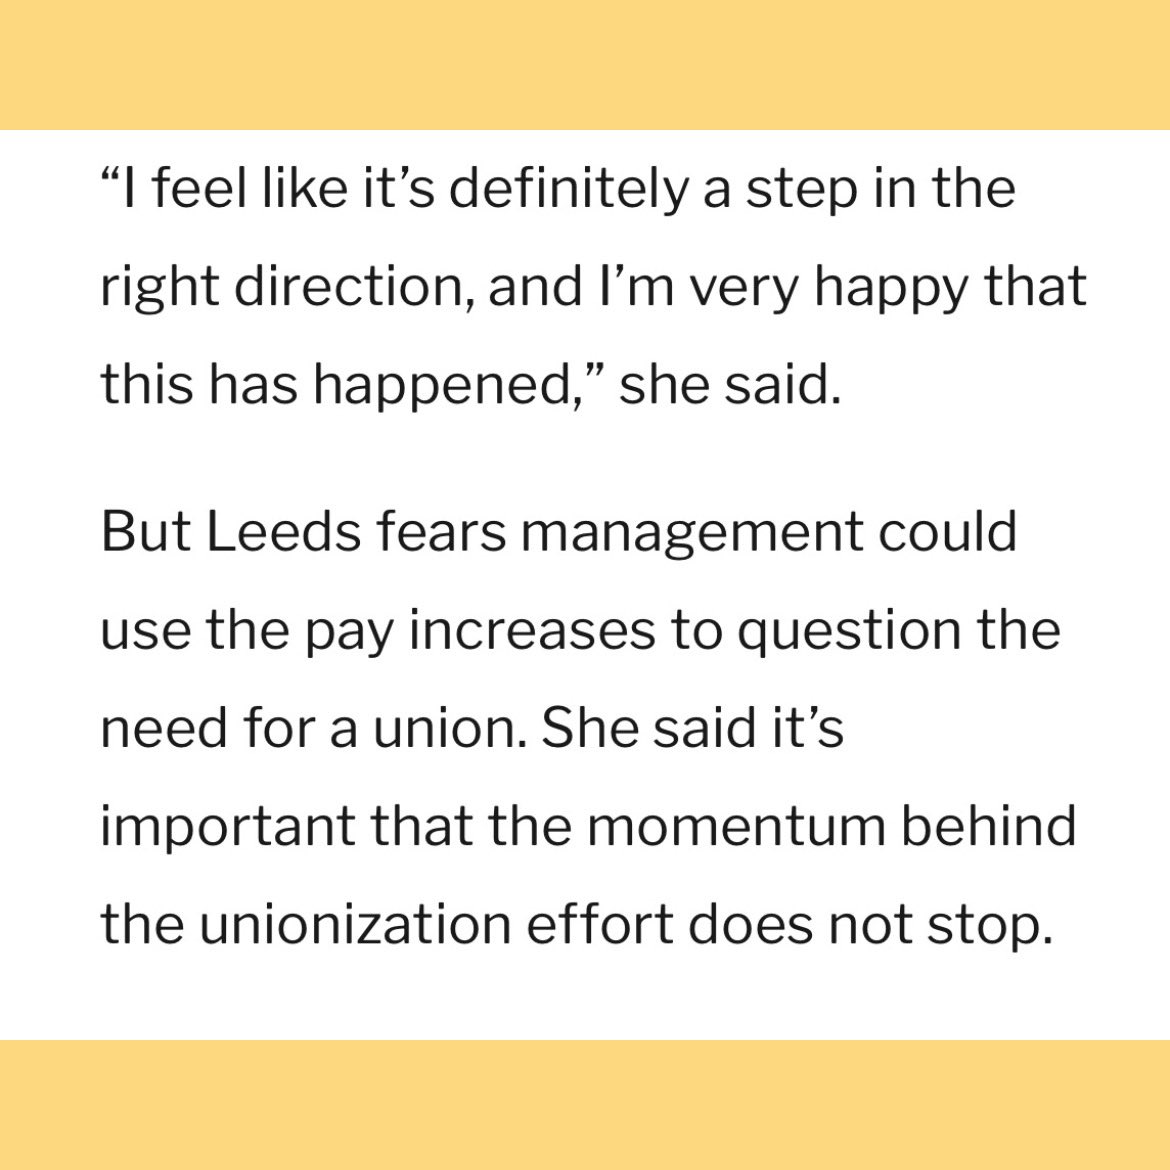 Rachel Leeds, WWU member and Accessibility Advocate at The Walters Art Museum spoke with Cadence Quaranta from @baltimorebanner yesterday to discuss our unionization and The Walters’ employee wage increase announcement:

(1/4)

#unionizeyourworkplace #solidarity #Baltimore